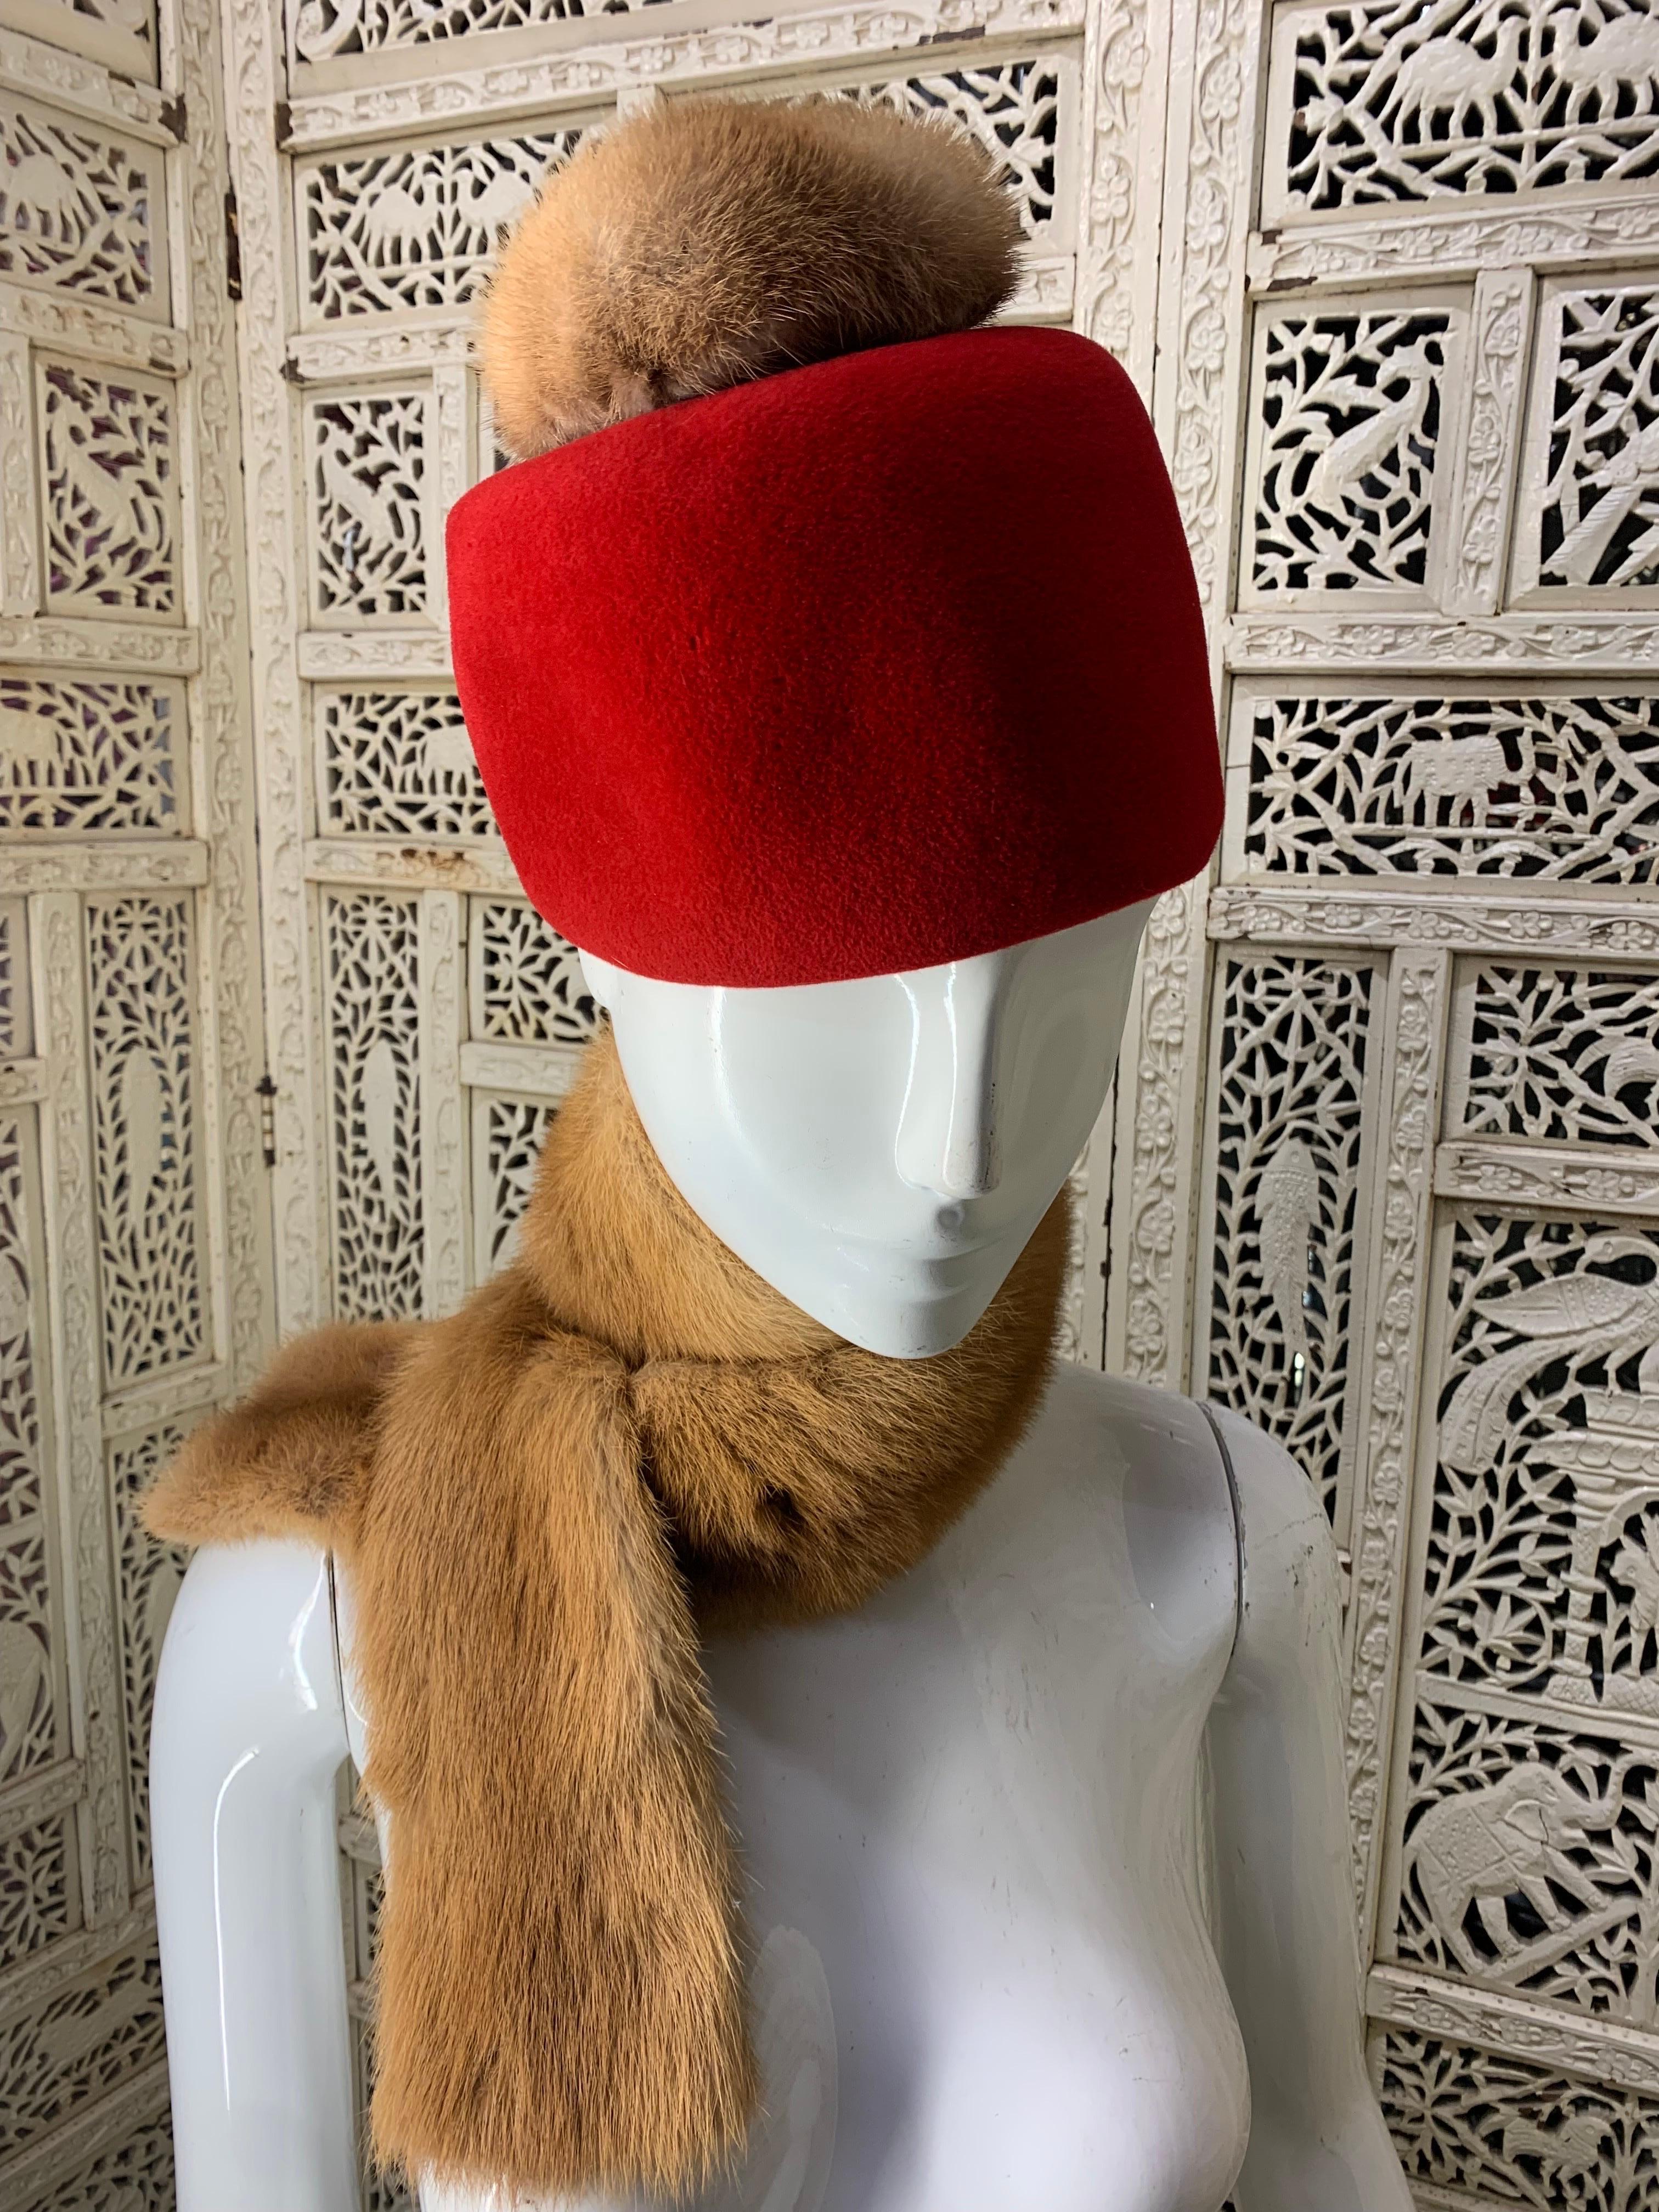 1960s Mod Jan Leslie Red Felt Tall Hat w Fur Pompon & Chanel Mink Scarf Ensemble: This striking Mod set (sold as ensemble) features a fez-style hat, simple and bold with a large mink pompon at top and a genuine Chanel mink neck scarf lined with silk